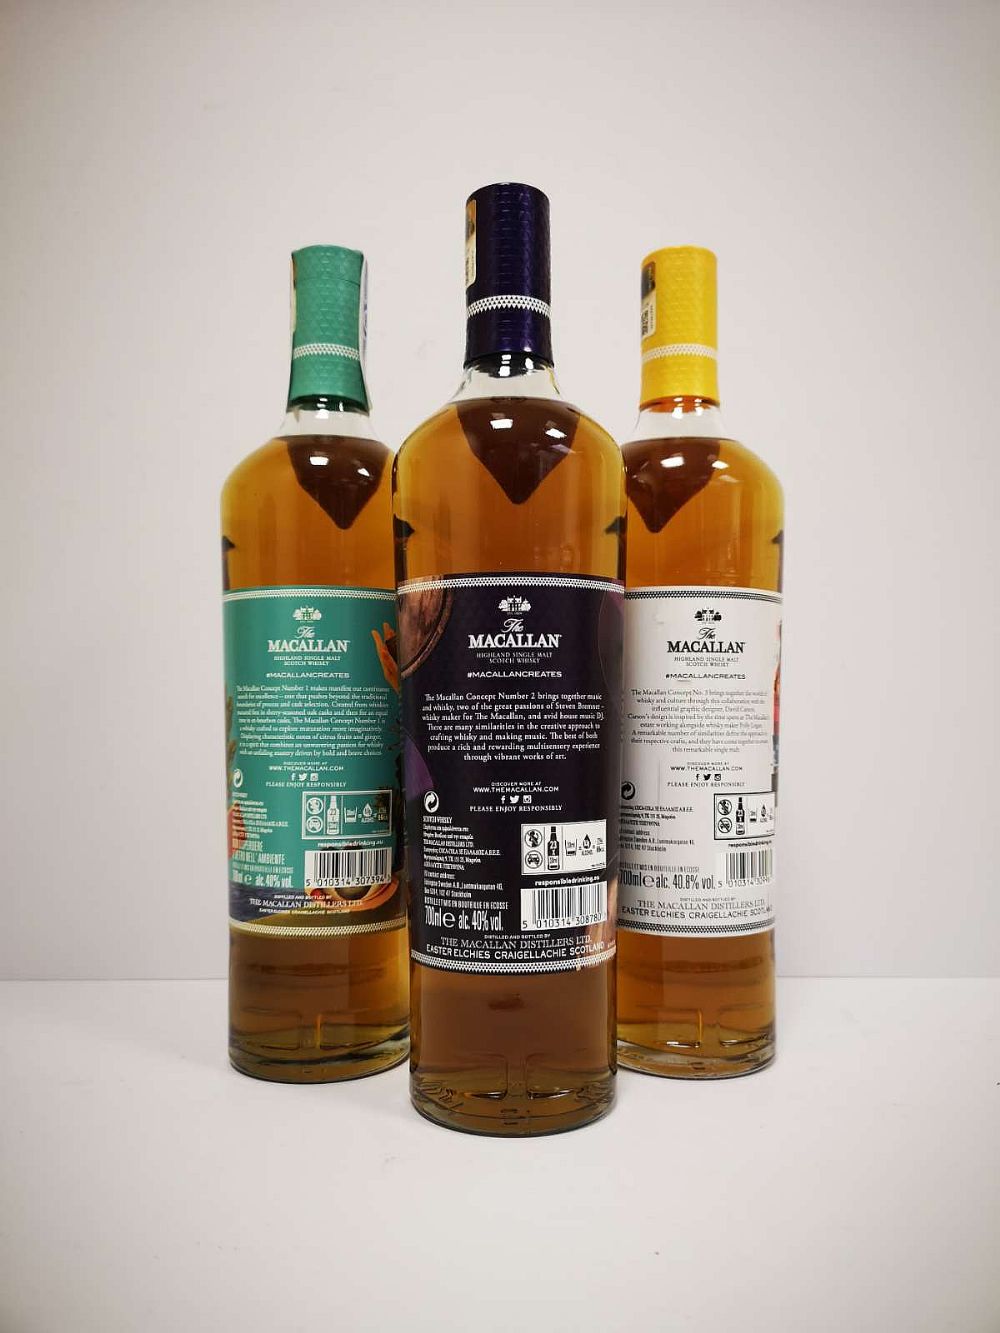 The Macallan Concept Set - Limited Editions 1, 2 and 3